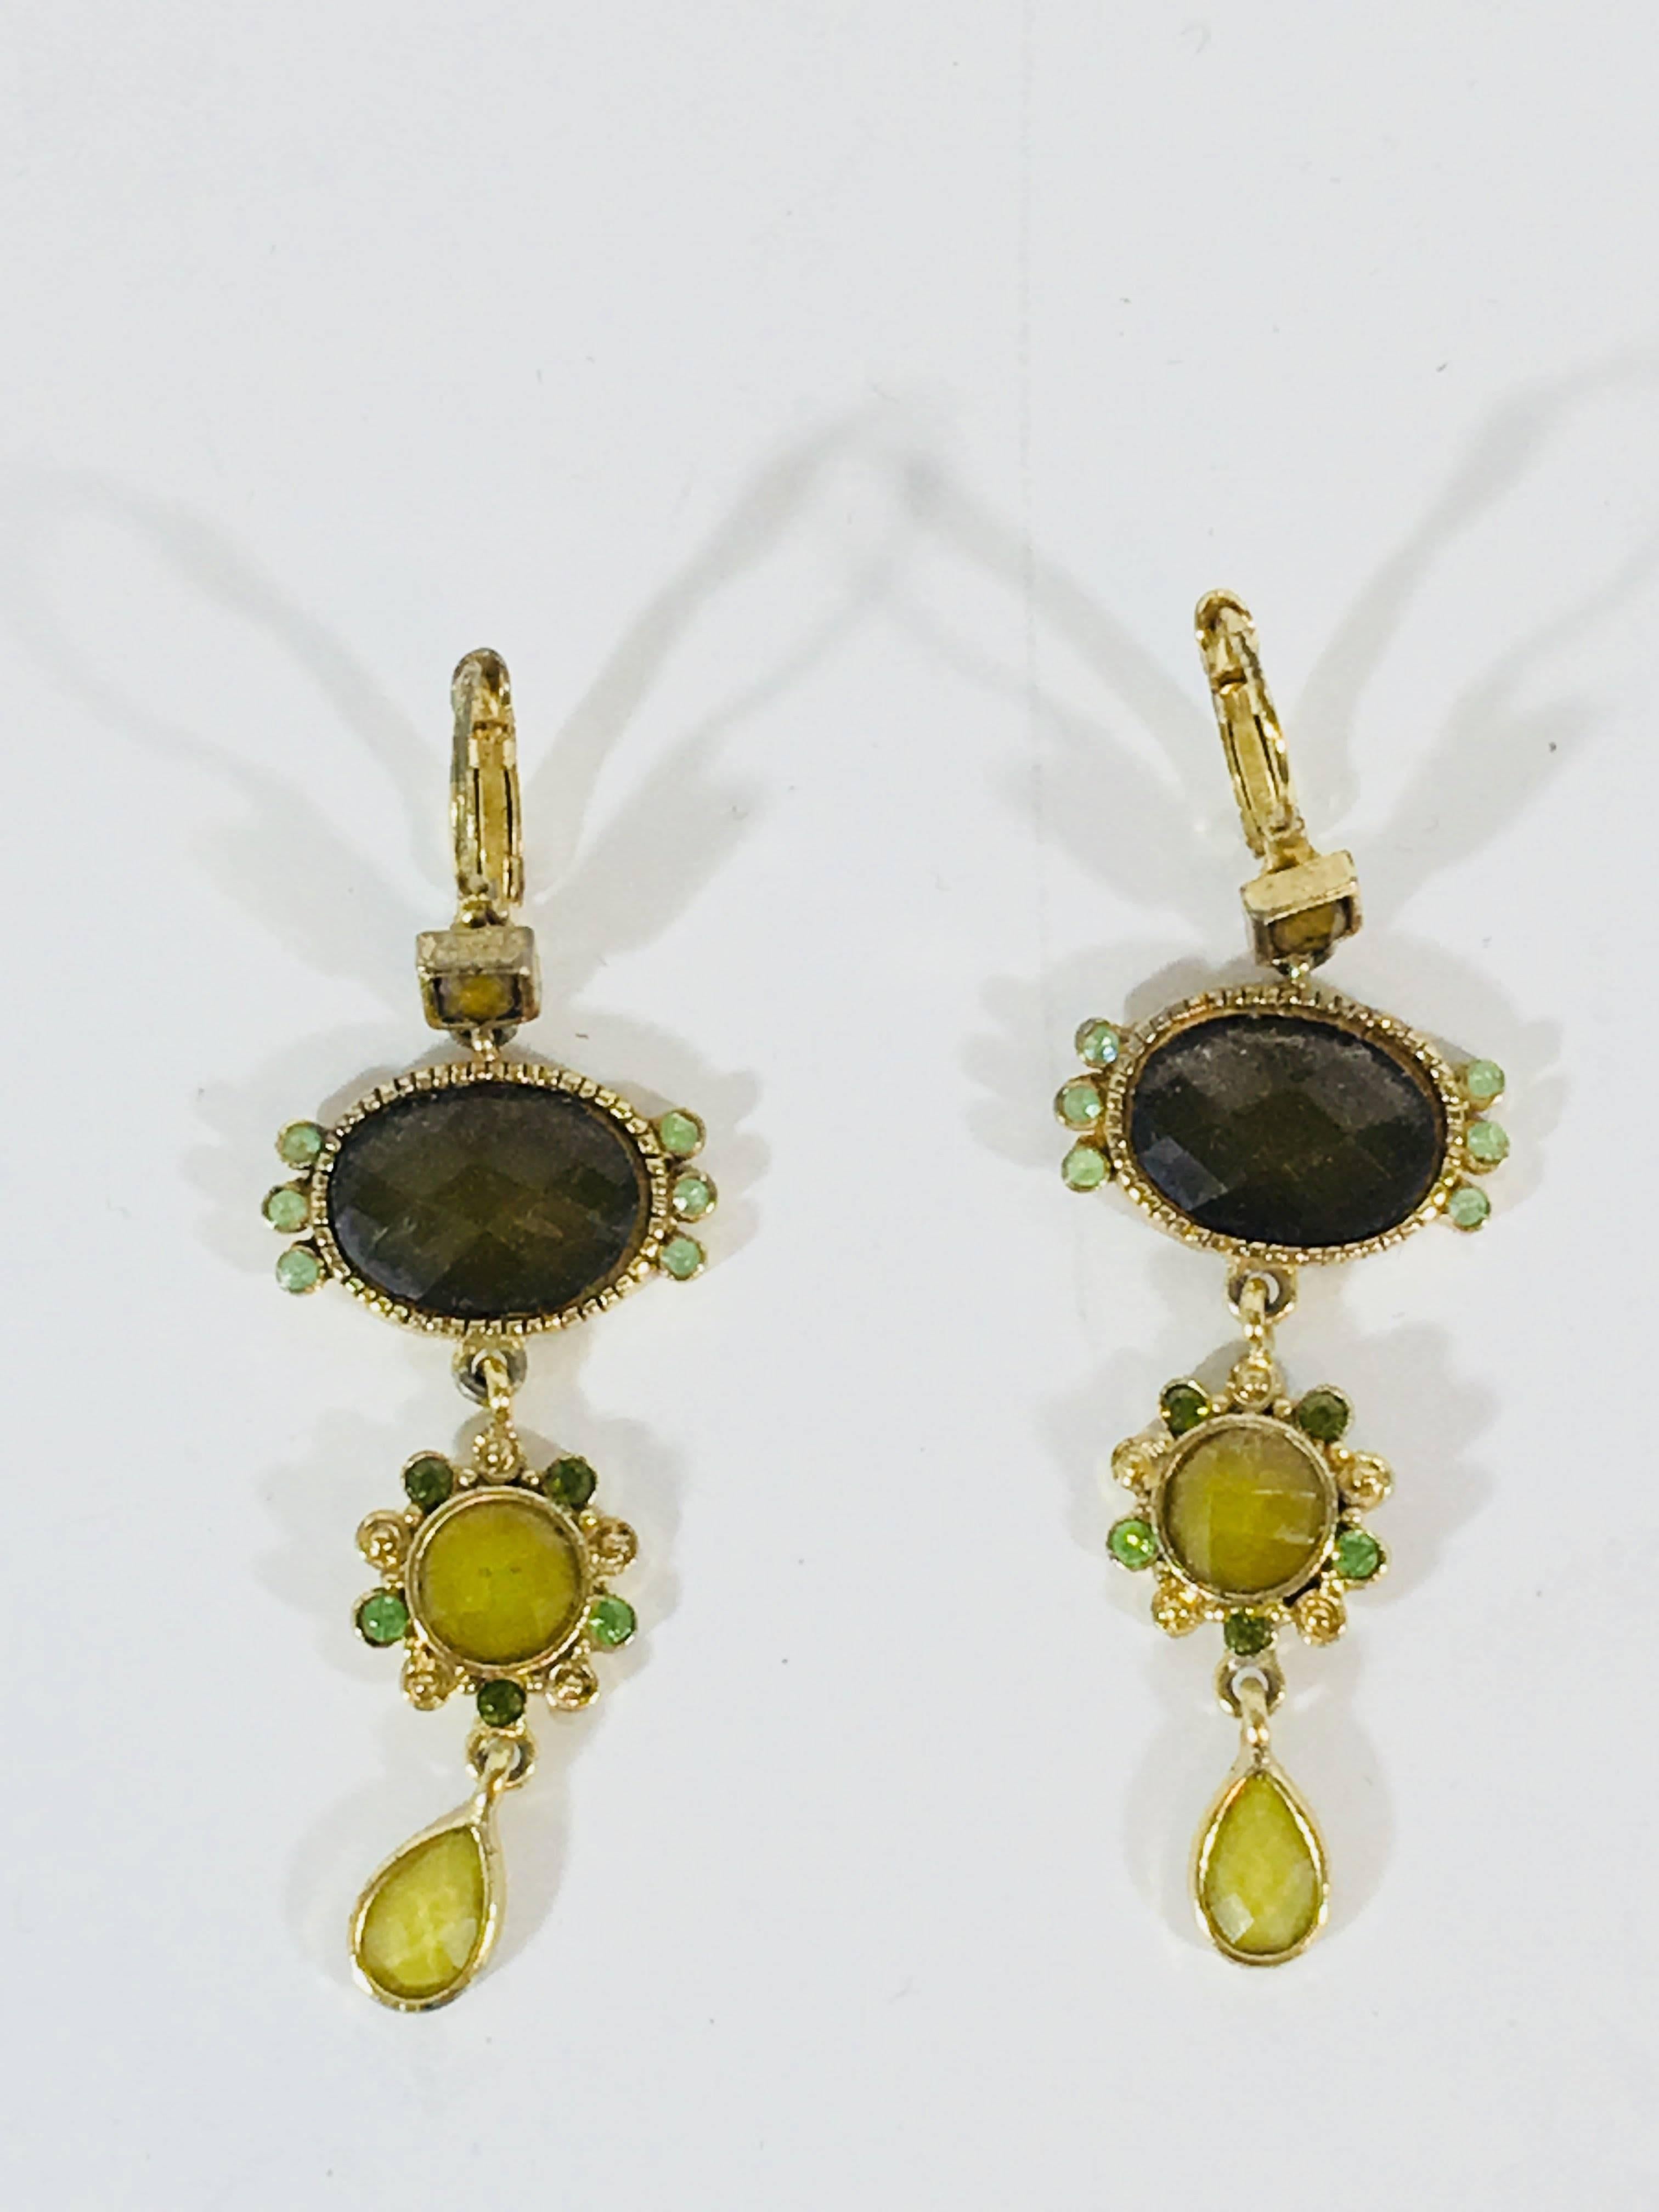 3-Tier Dangle Earrings with Green and Yellow Stones on French Wire